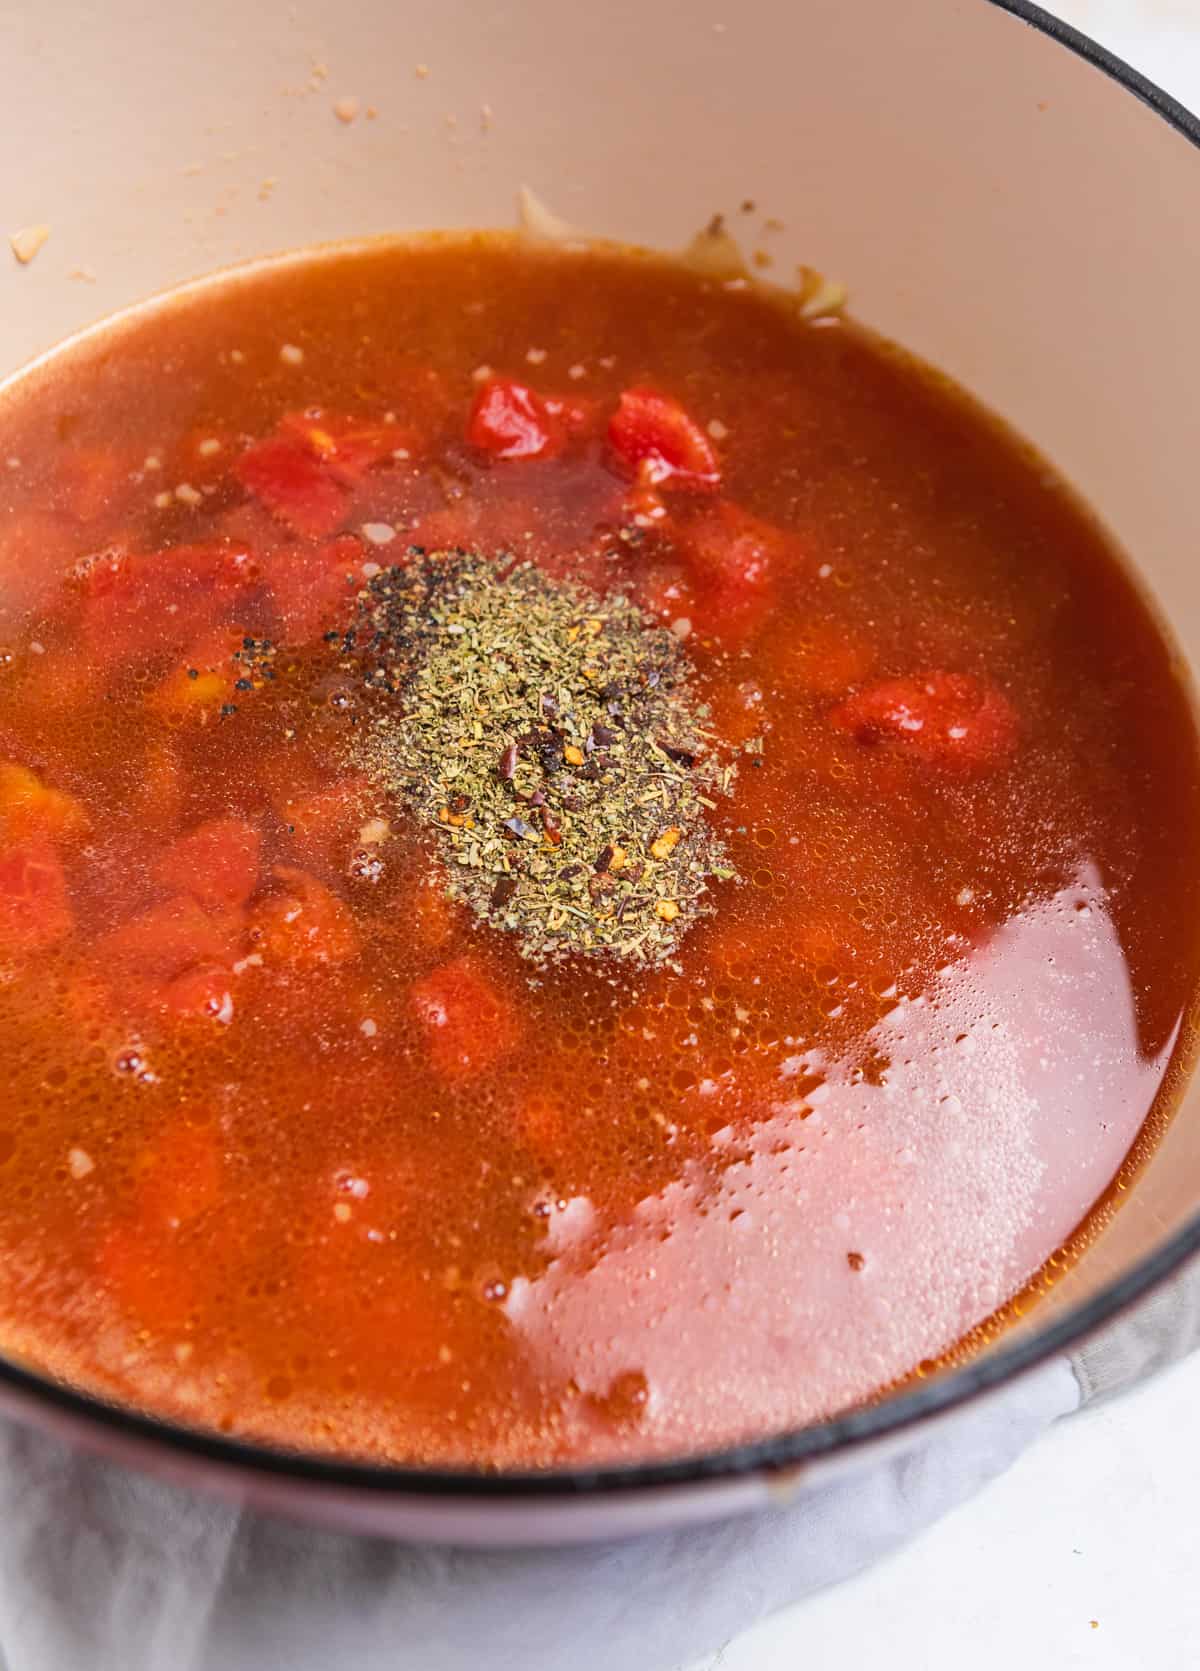 Pot with broth, tomatoes and seasonings added over top.